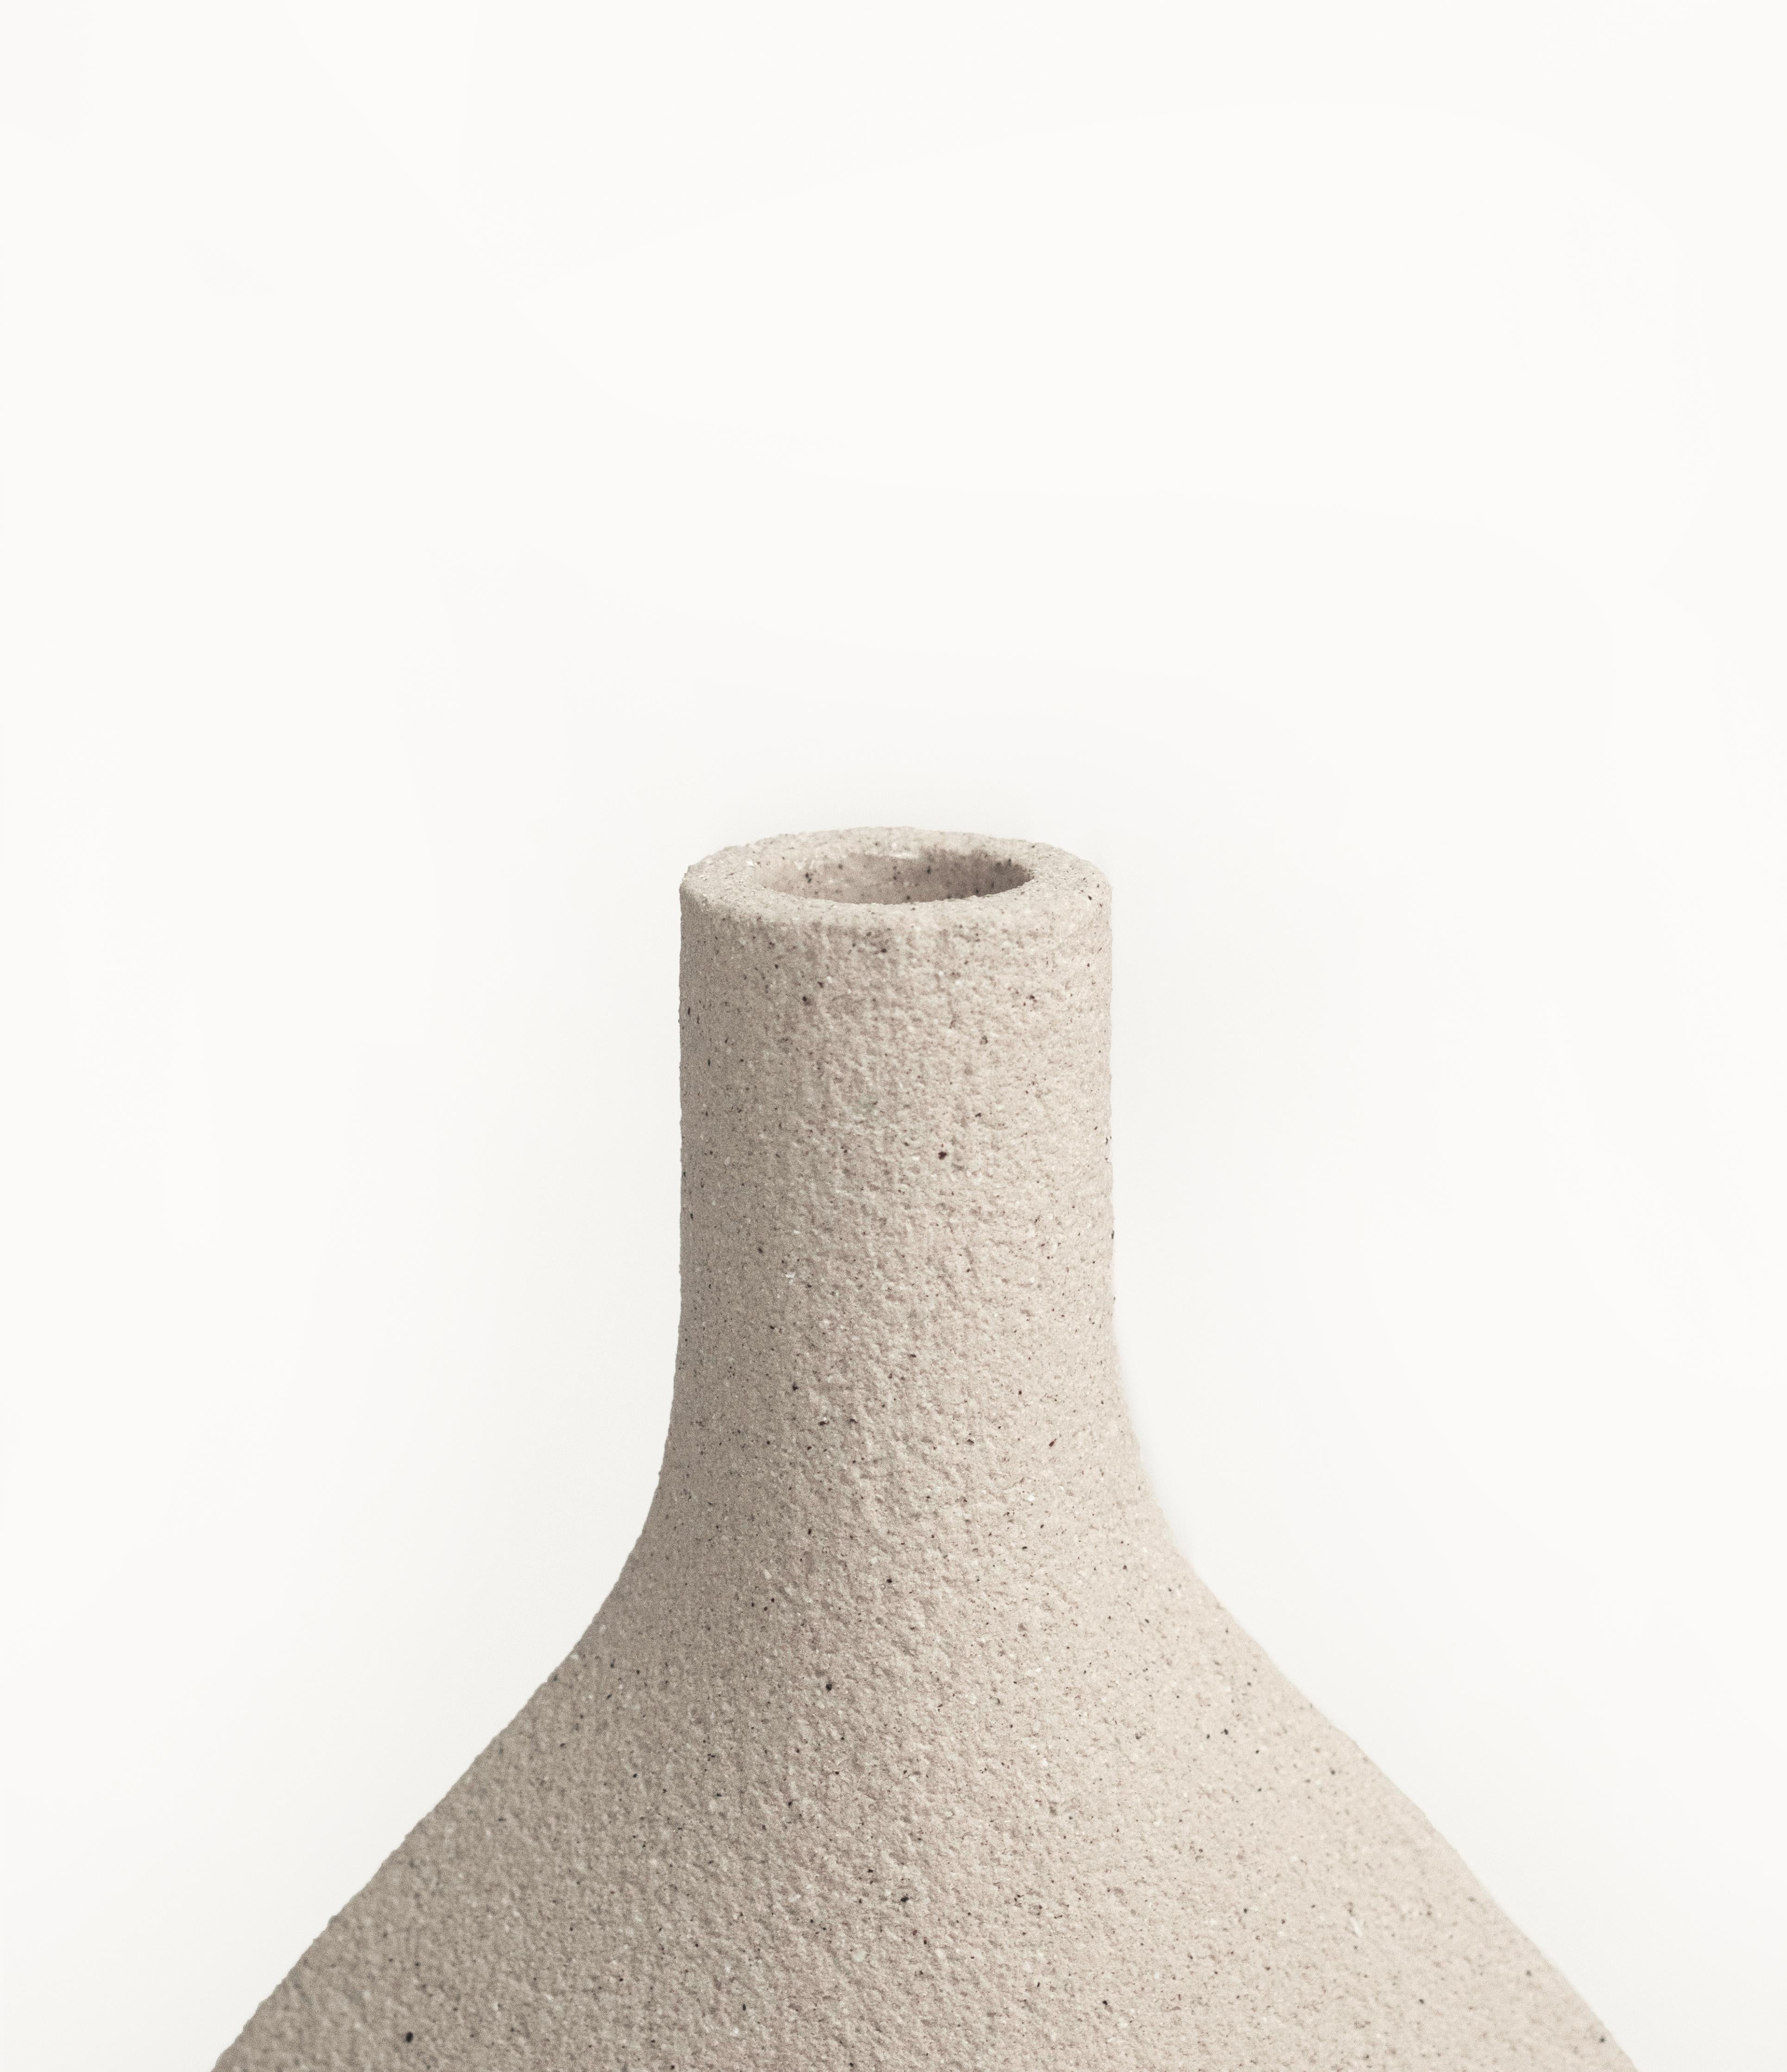 Minimalist 21st Century Triangle Vase in White Ceramic, Hand-Crafted in France